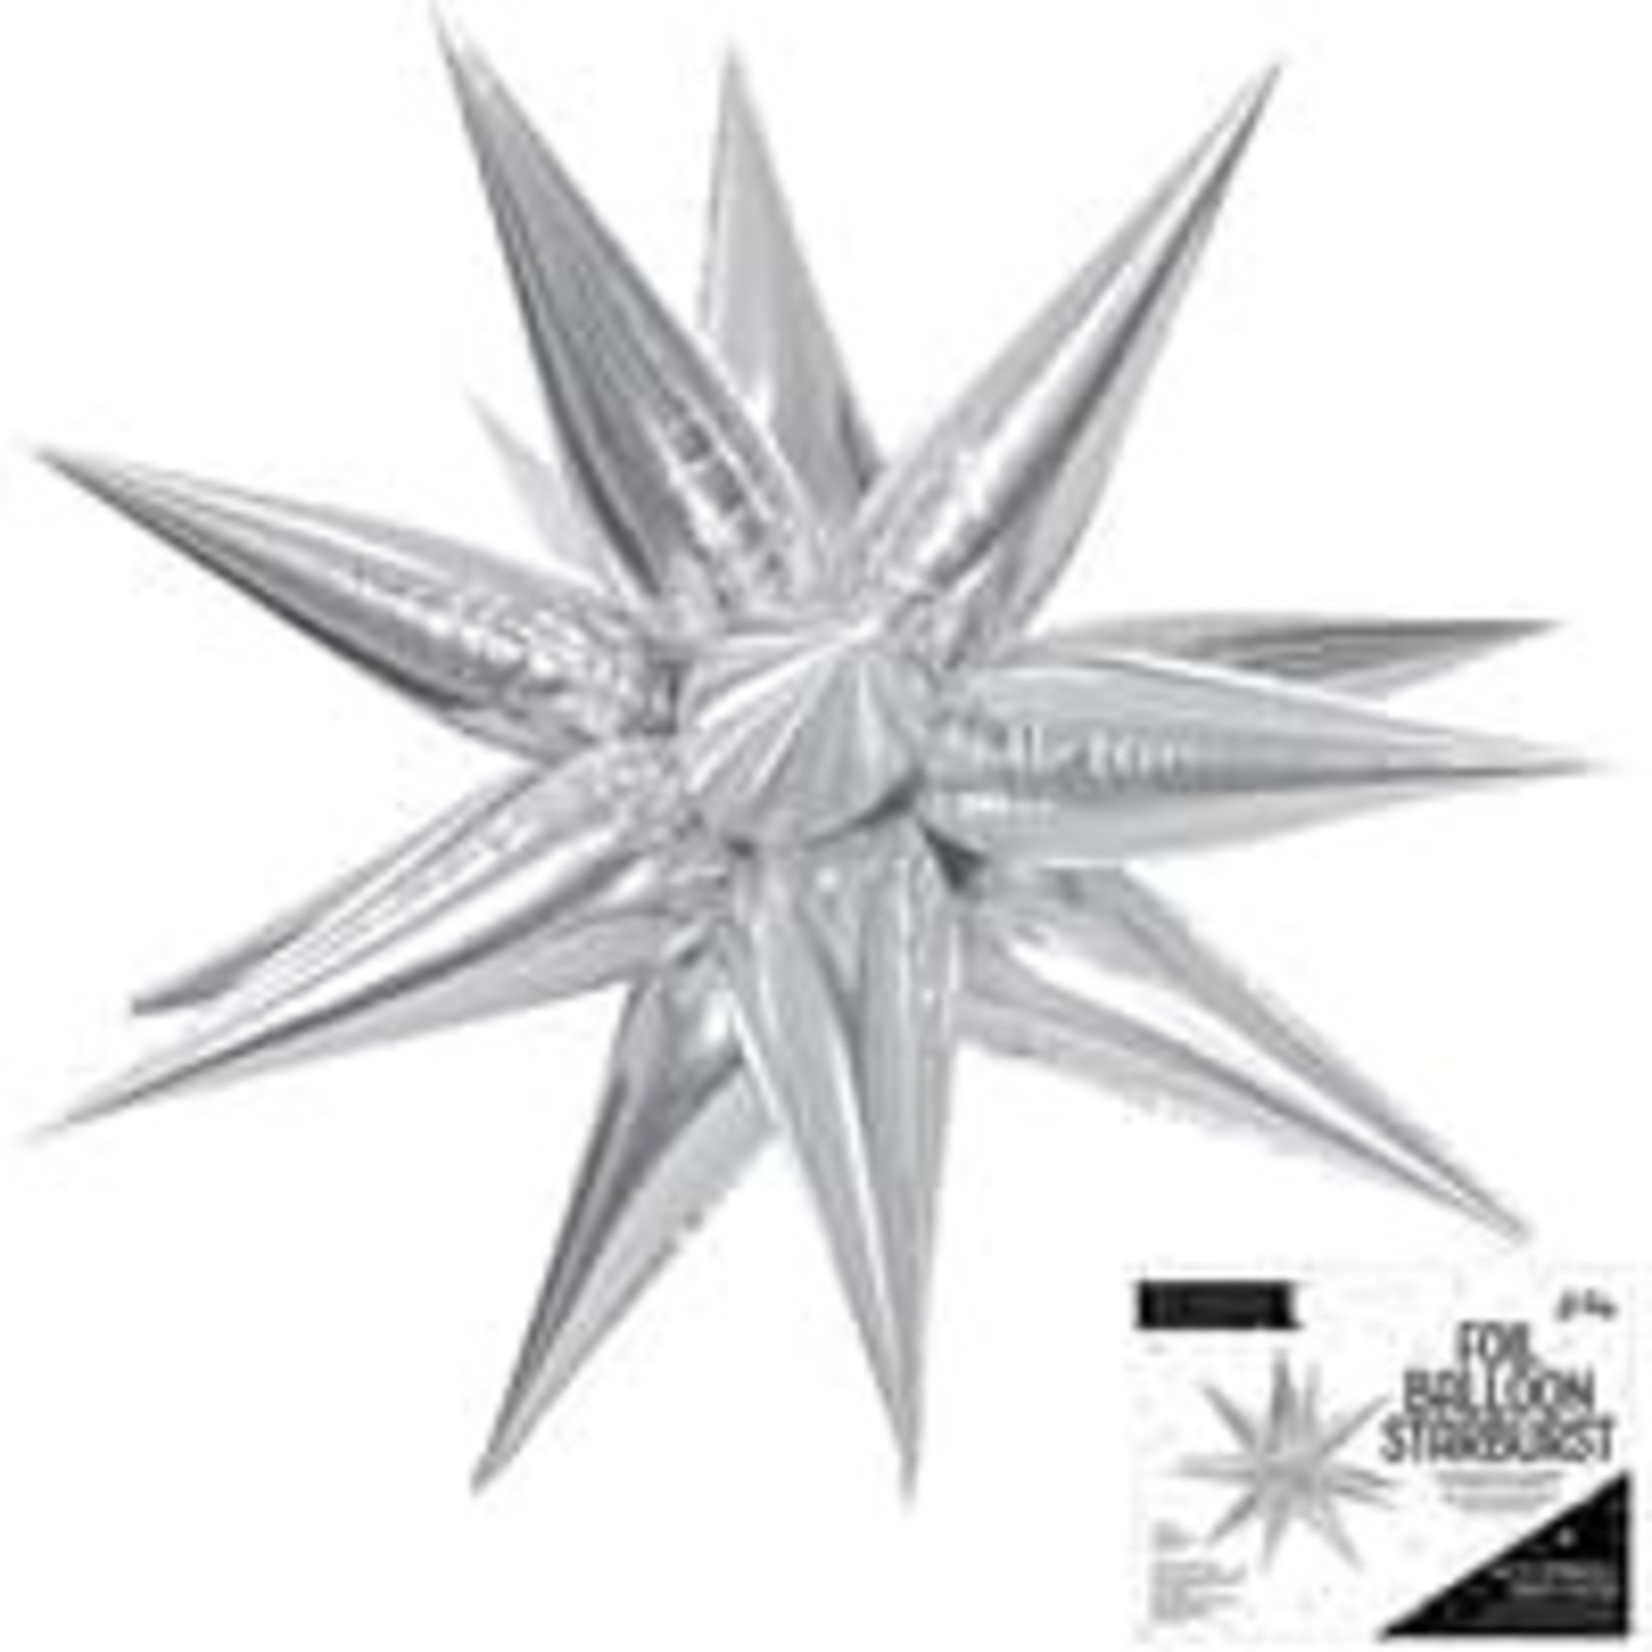 La Fete 26" Silver Starburst Balloon - 1ct. (Air-Filled Only)